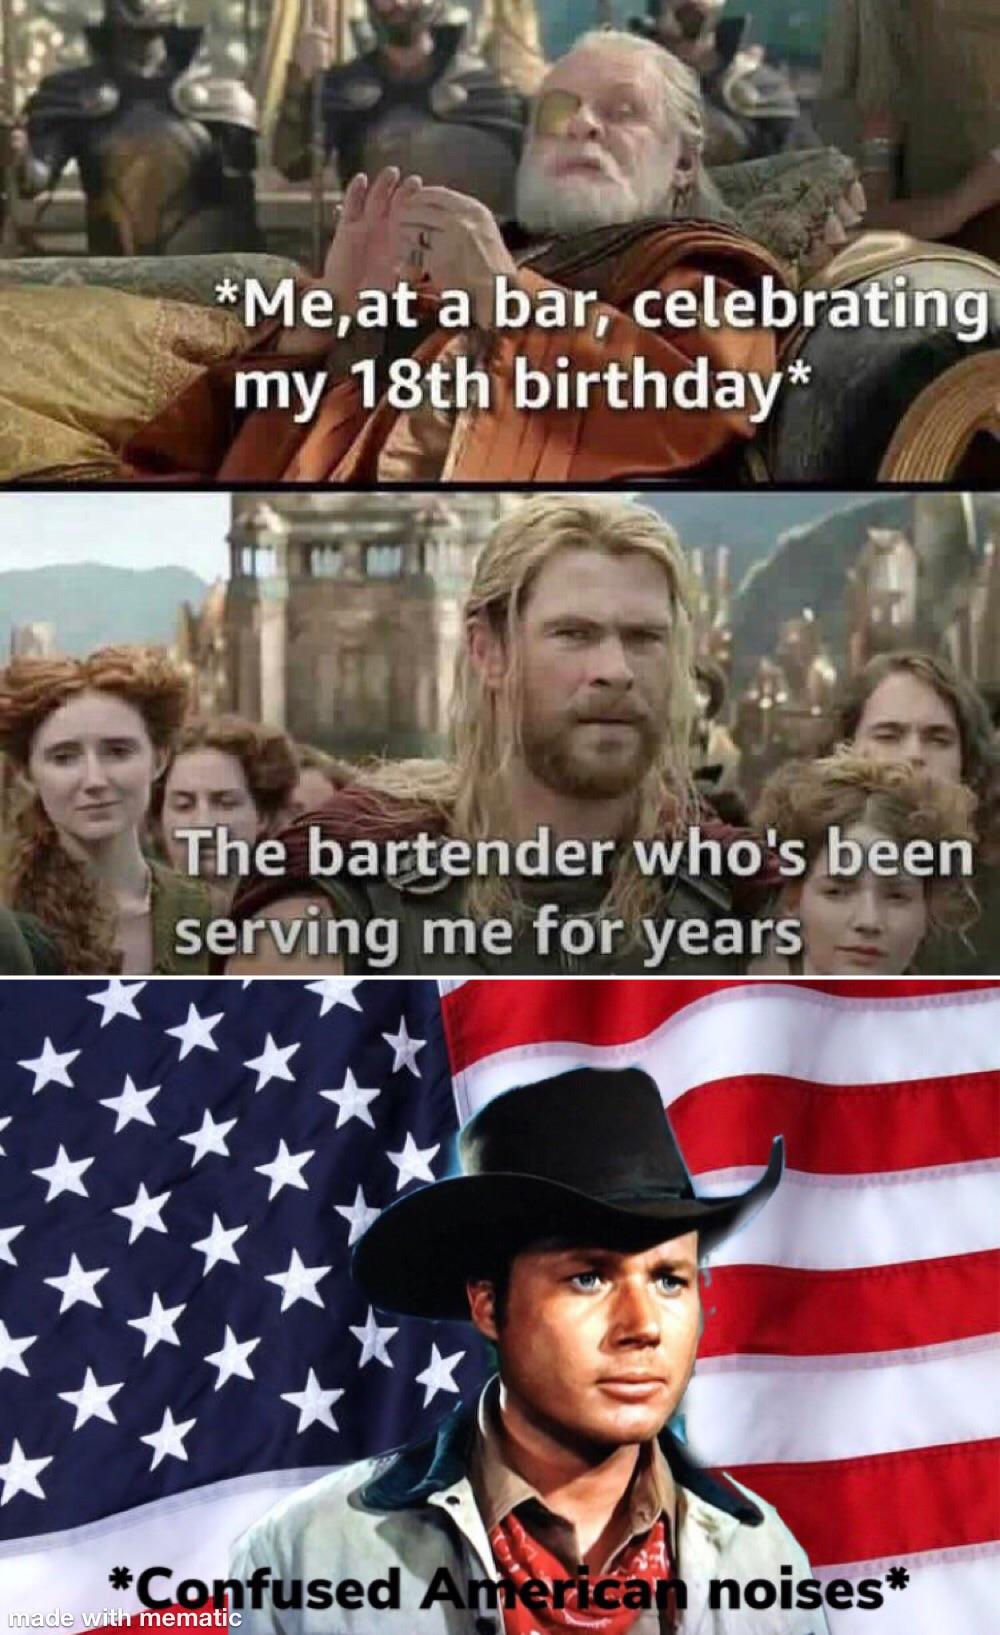 photo caption - Me,at a bar, celebrating my 18th birthday The bartender who's been serving me for years Confused American noises made with mematic